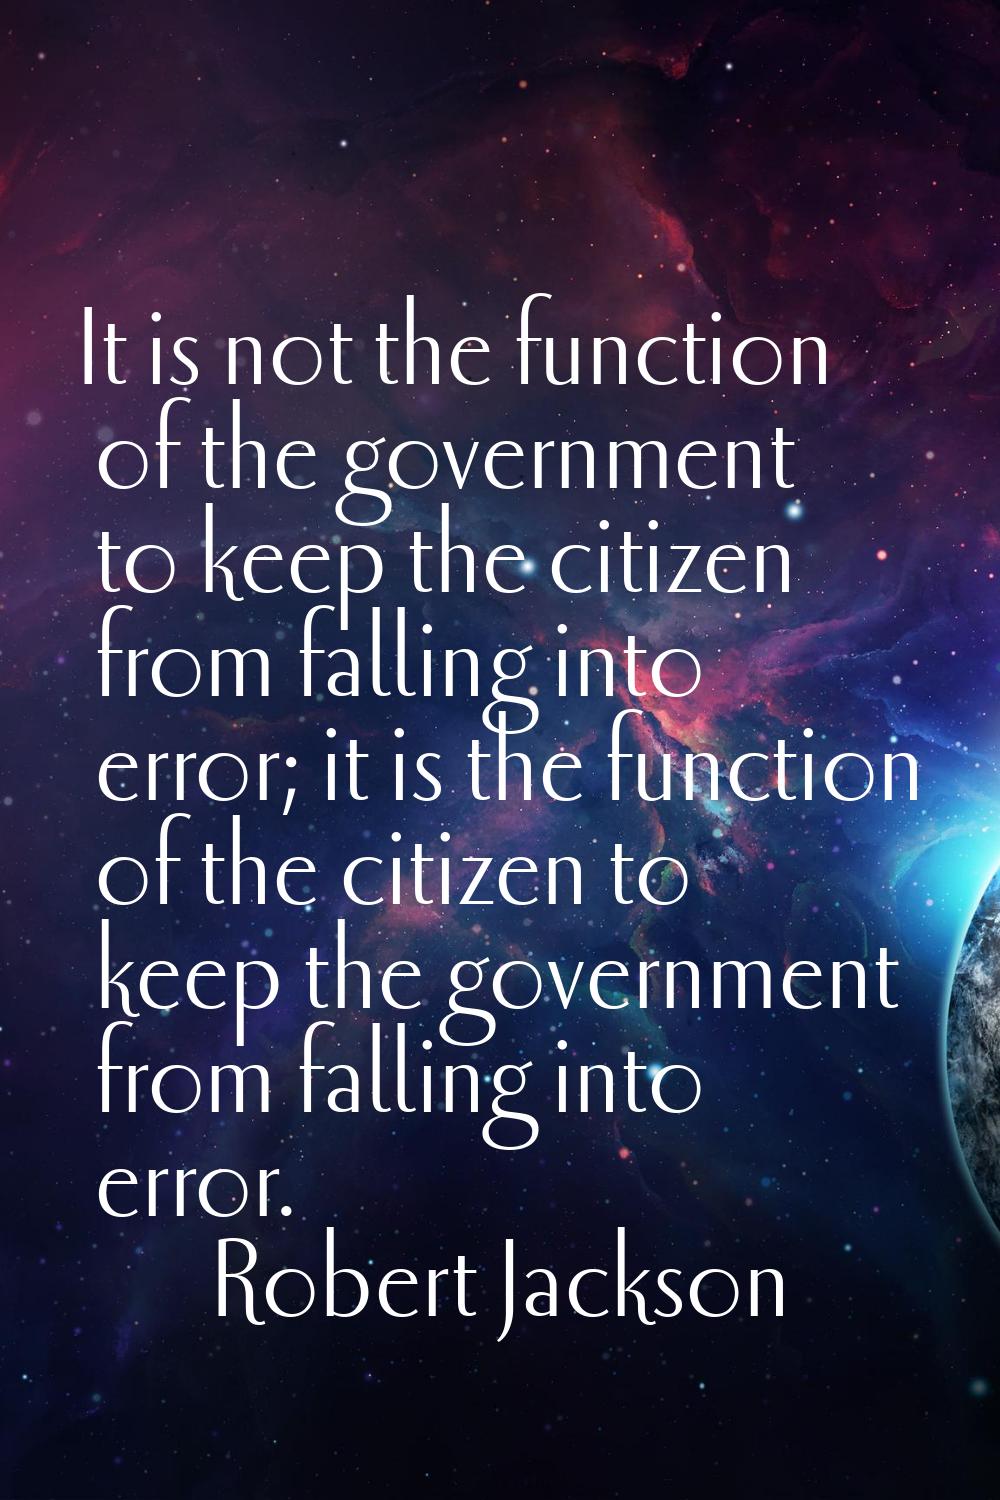 It is not the function of the government to keep the citizen from falling into error; it is the fun